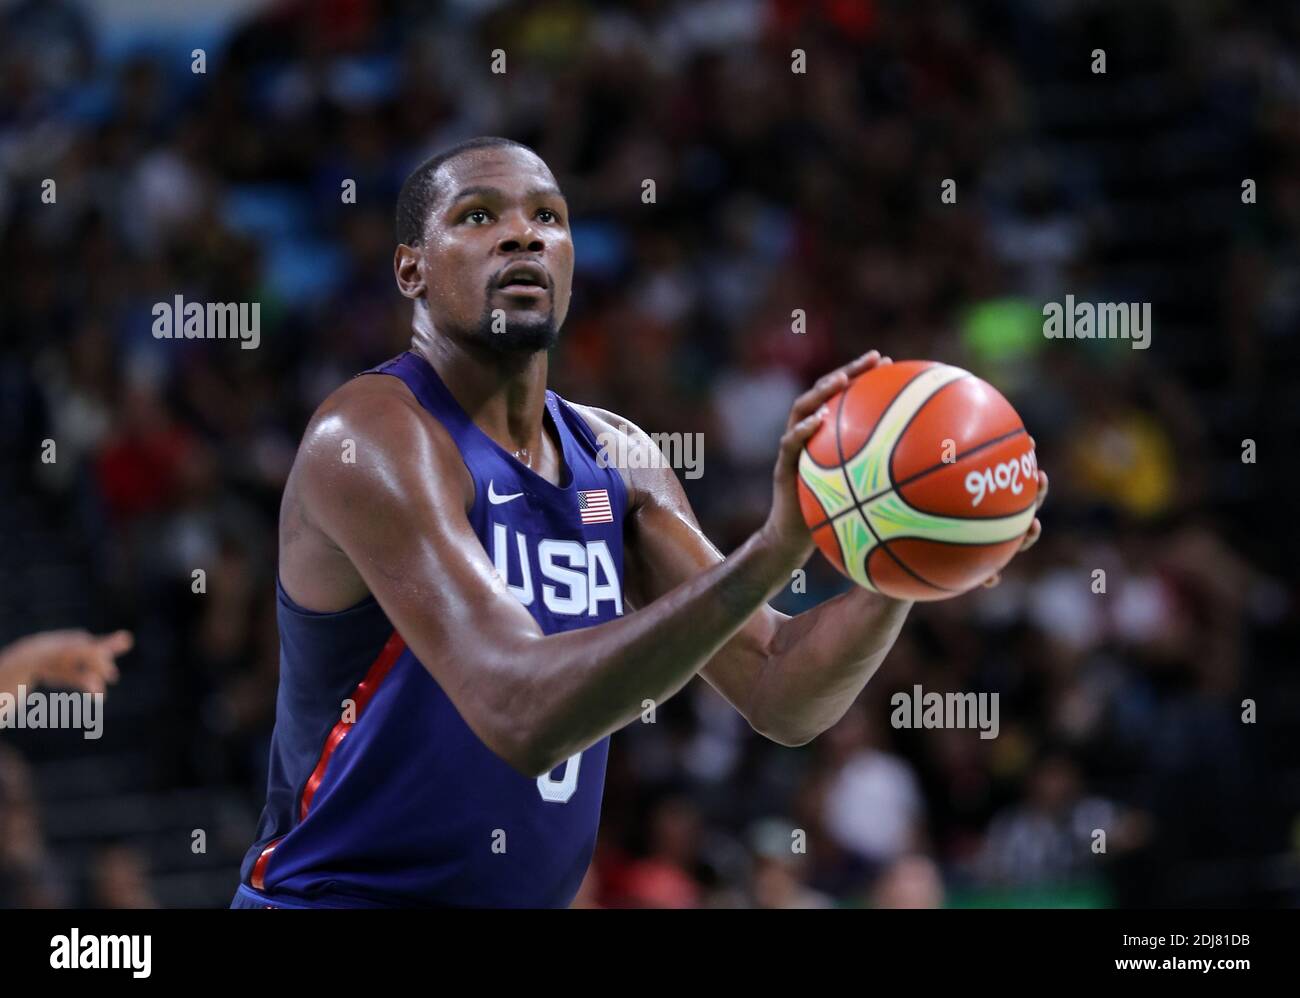 Kevin Durant Usa Team Usa S Wins Over Serbia In The Basketball Gold Medal Game On Sunday August 21 16 At The Rio Olympic Games Photo By Giuliano Bevilacqua Abacapress Com Stock Photo Alamy